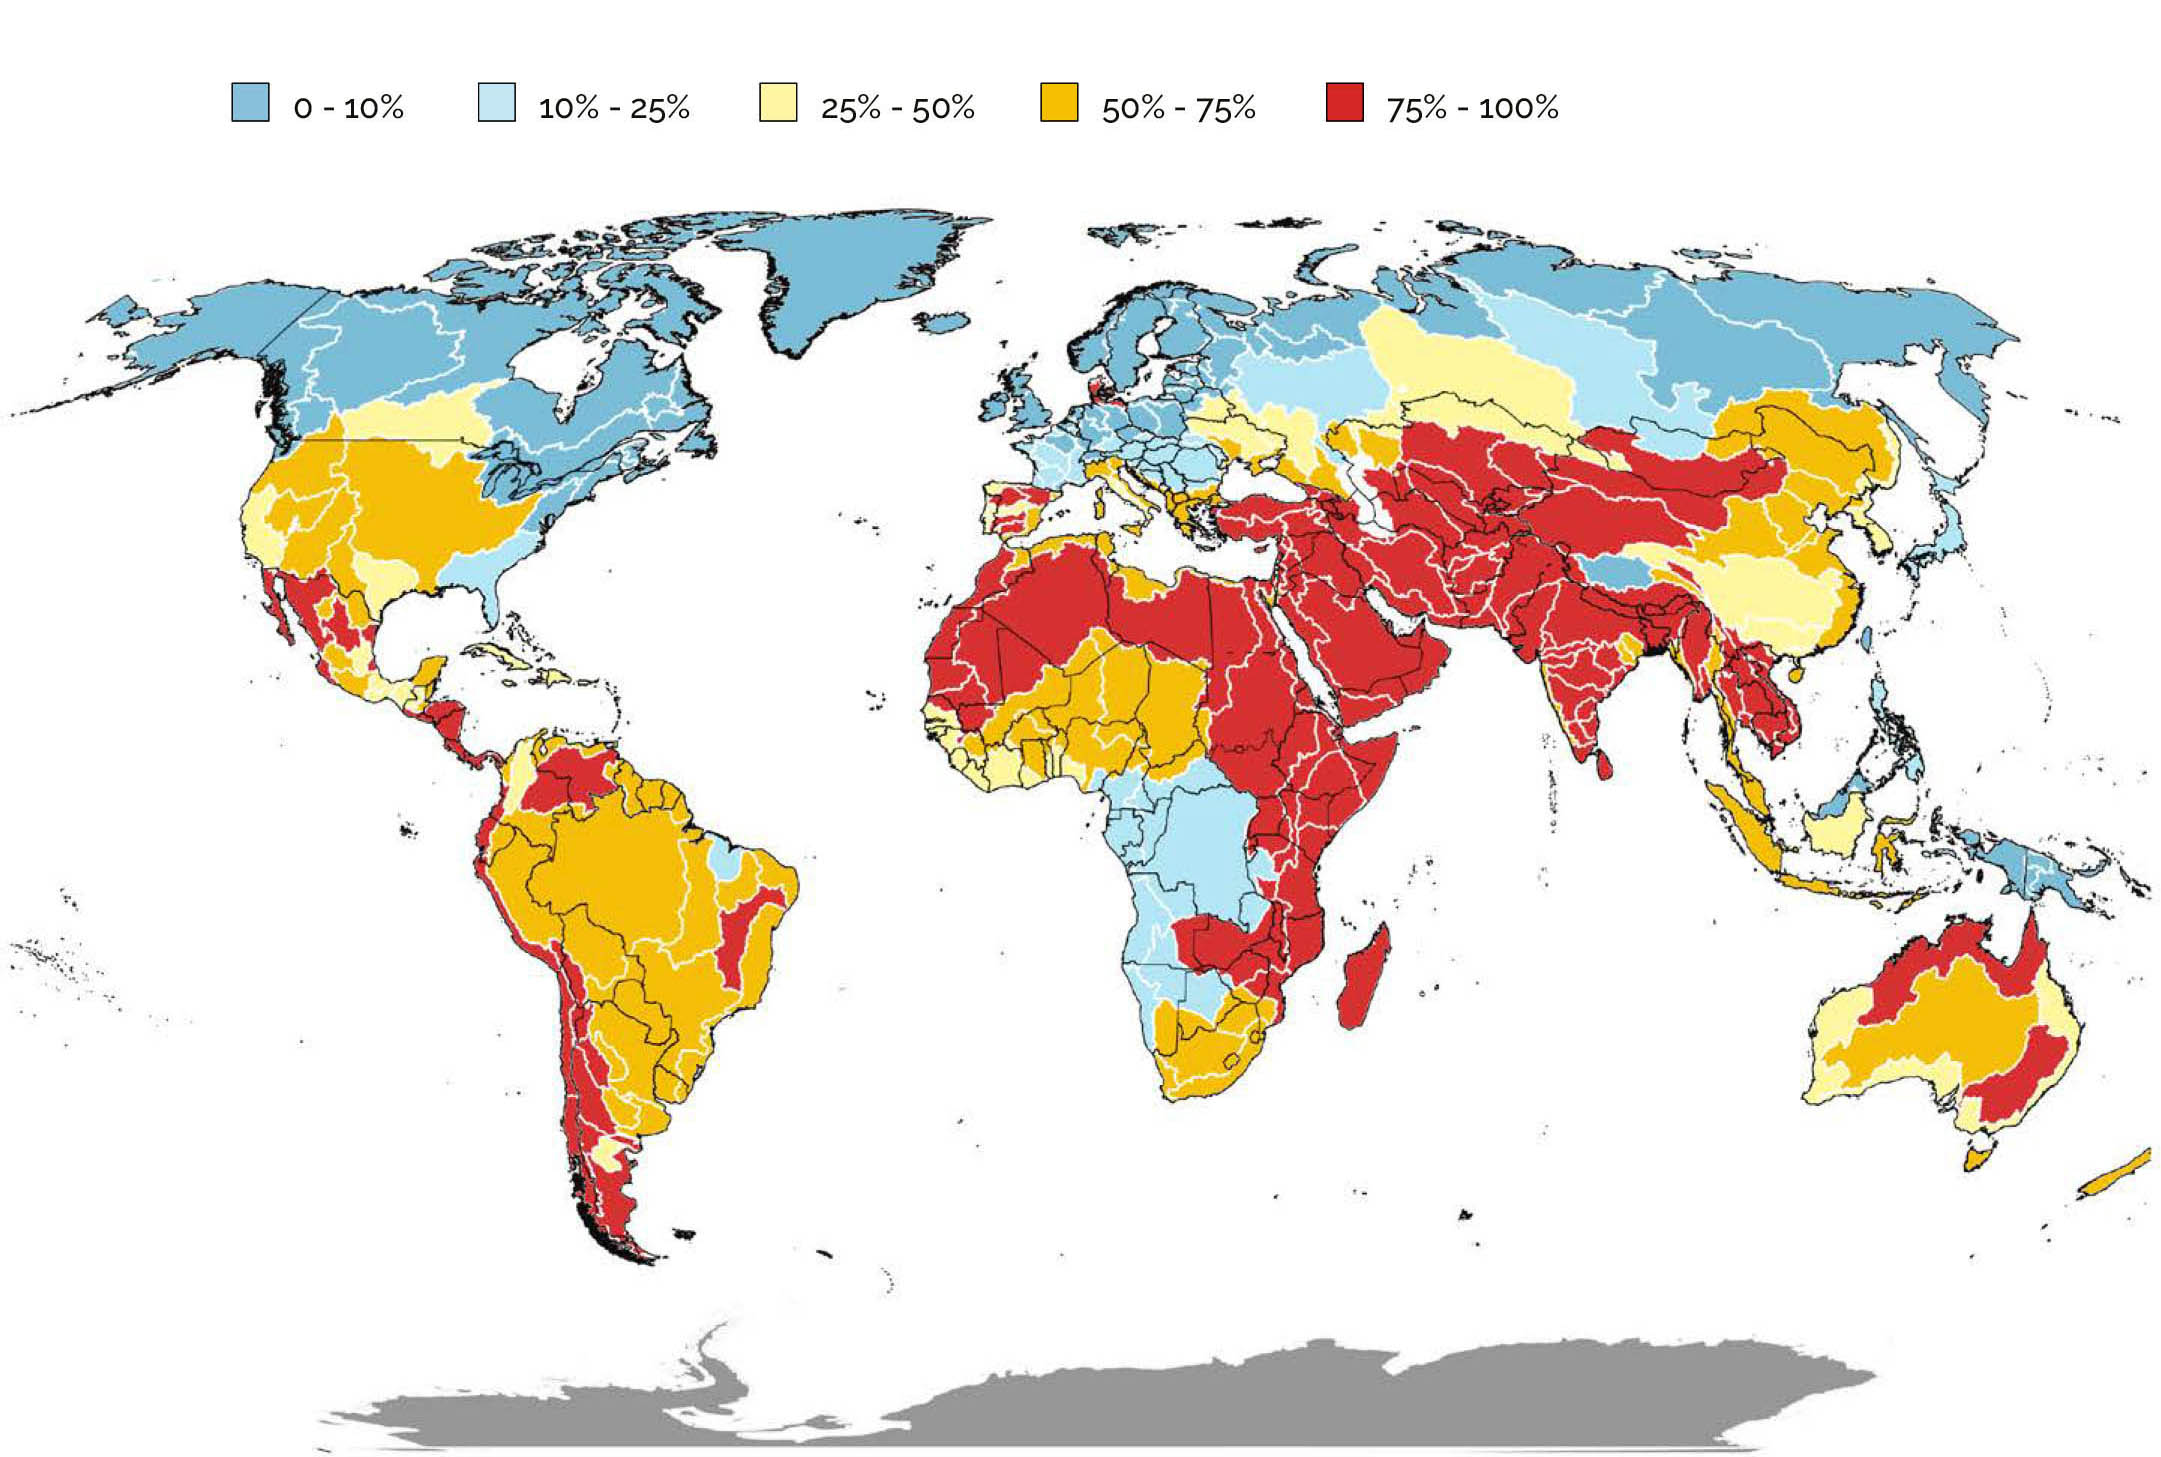 Source: FAO and UN-Water, 2021 modified to comply with UN, 2021.